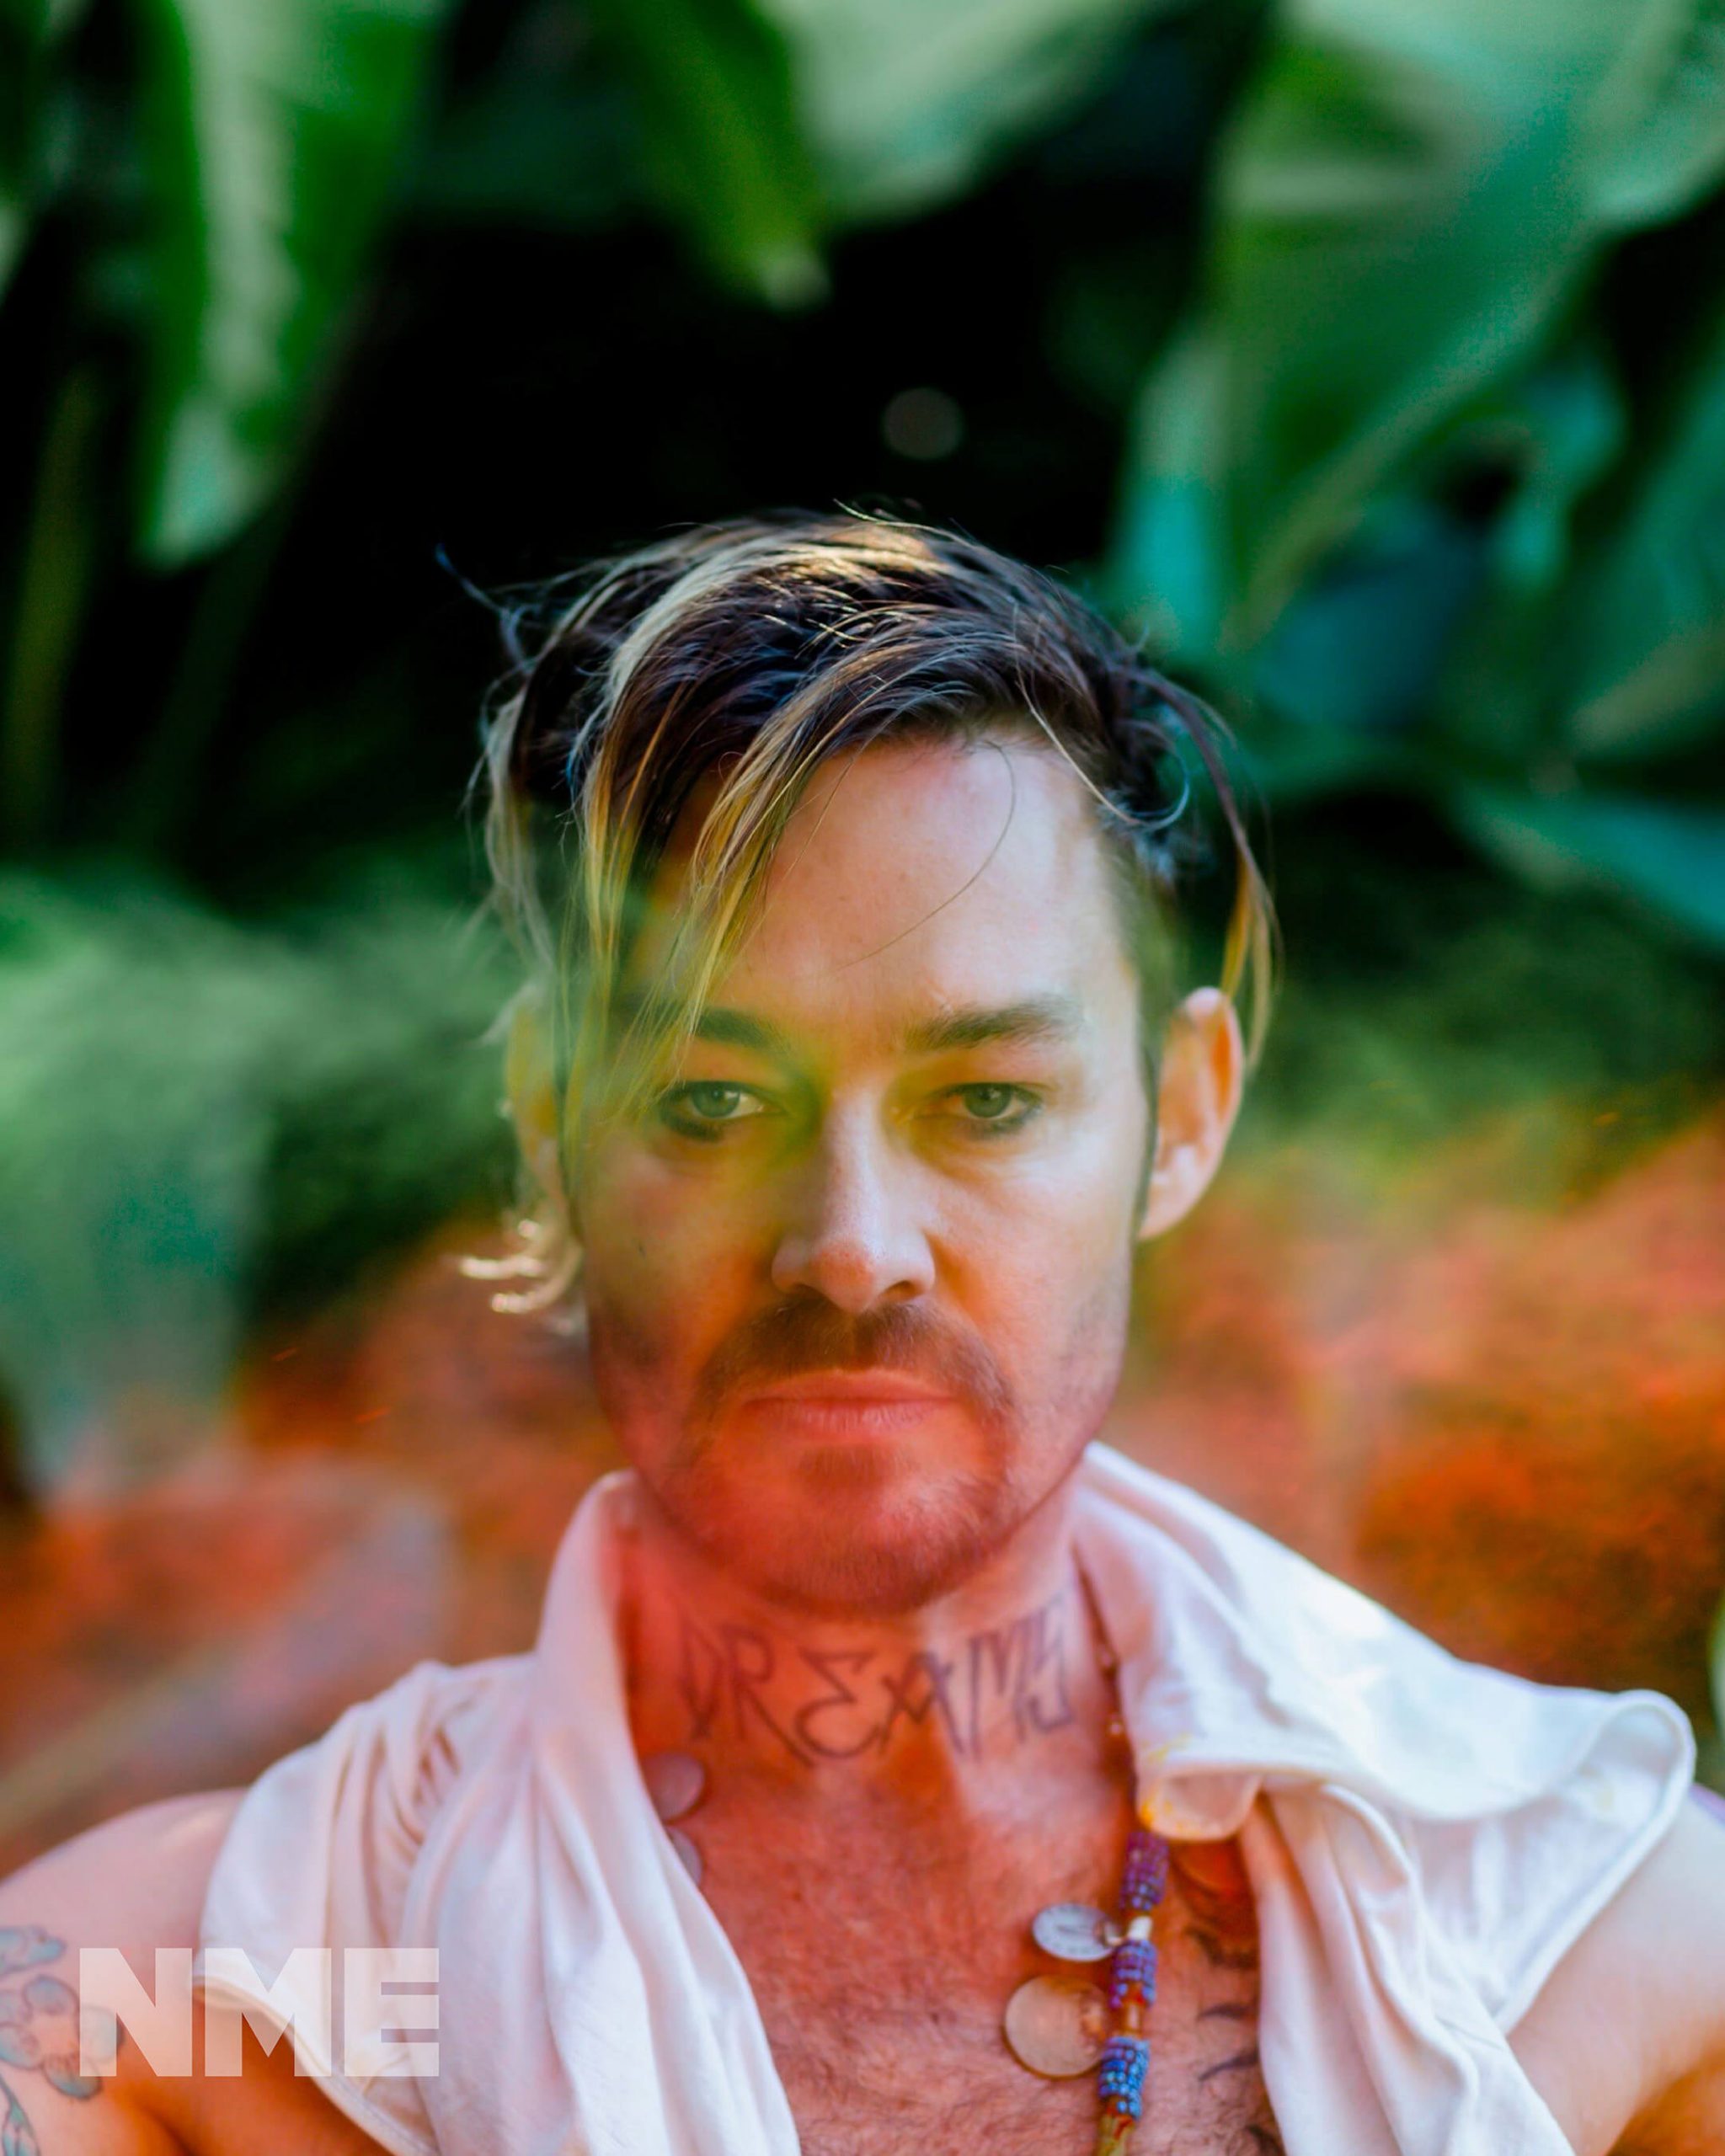 Daniel Johns Accident (August 2022) What You Need to Know About Daniel Johns' Jail Sentence?